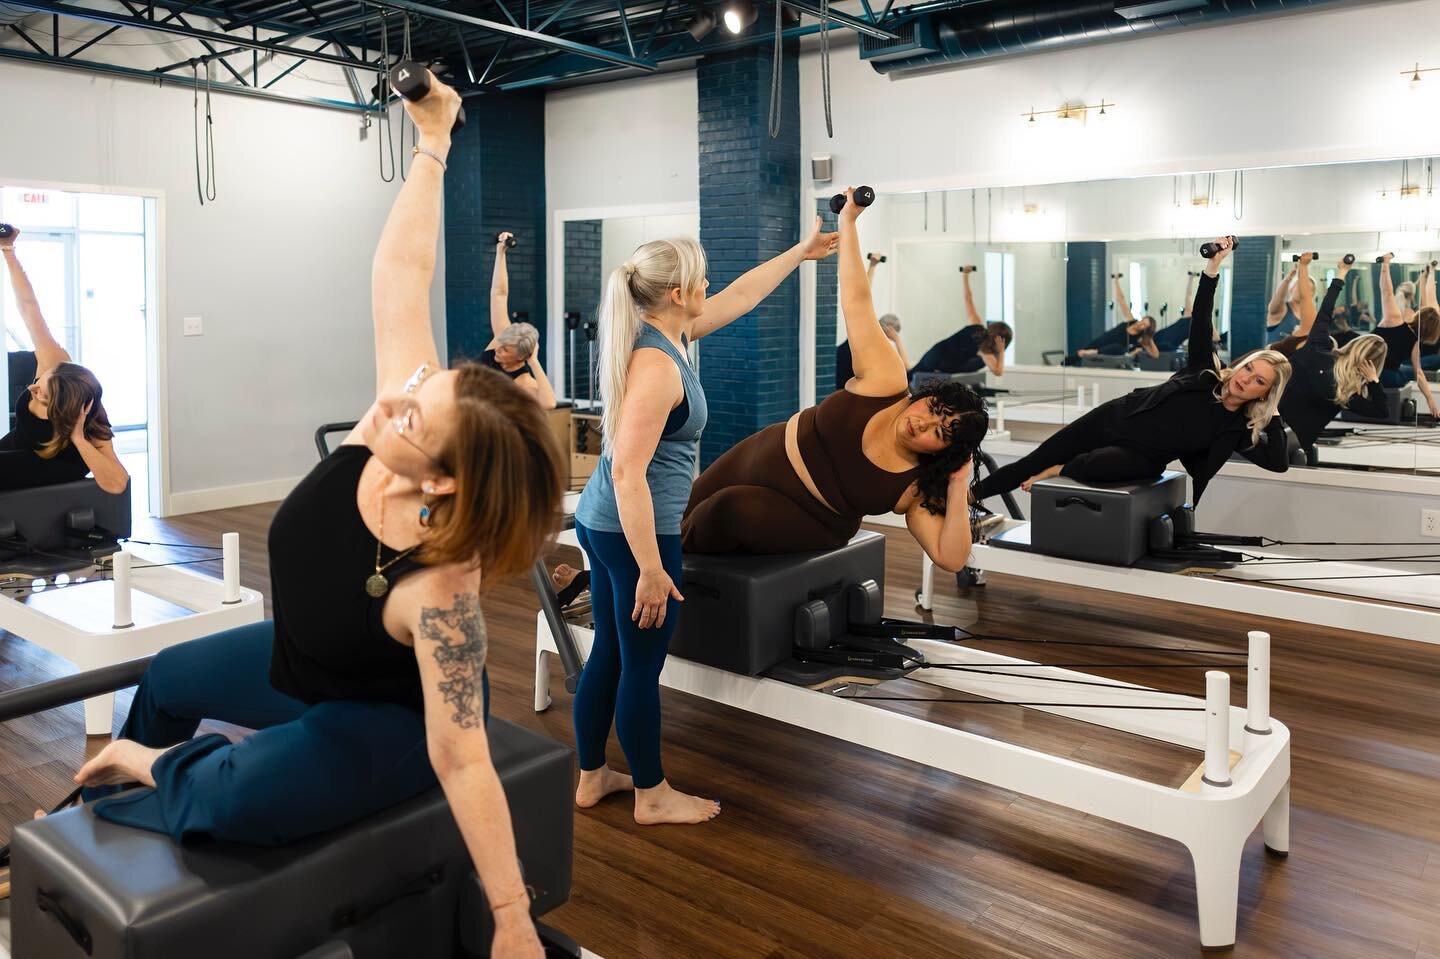 💫Class with Corrin💫

@corrinpiercefitness brings a vibrant energy to Pure Balance, creating an atmosphere where clients can have fun while challenging themselves!

With a background in strength training, Corrin incorporates layers of modifications,